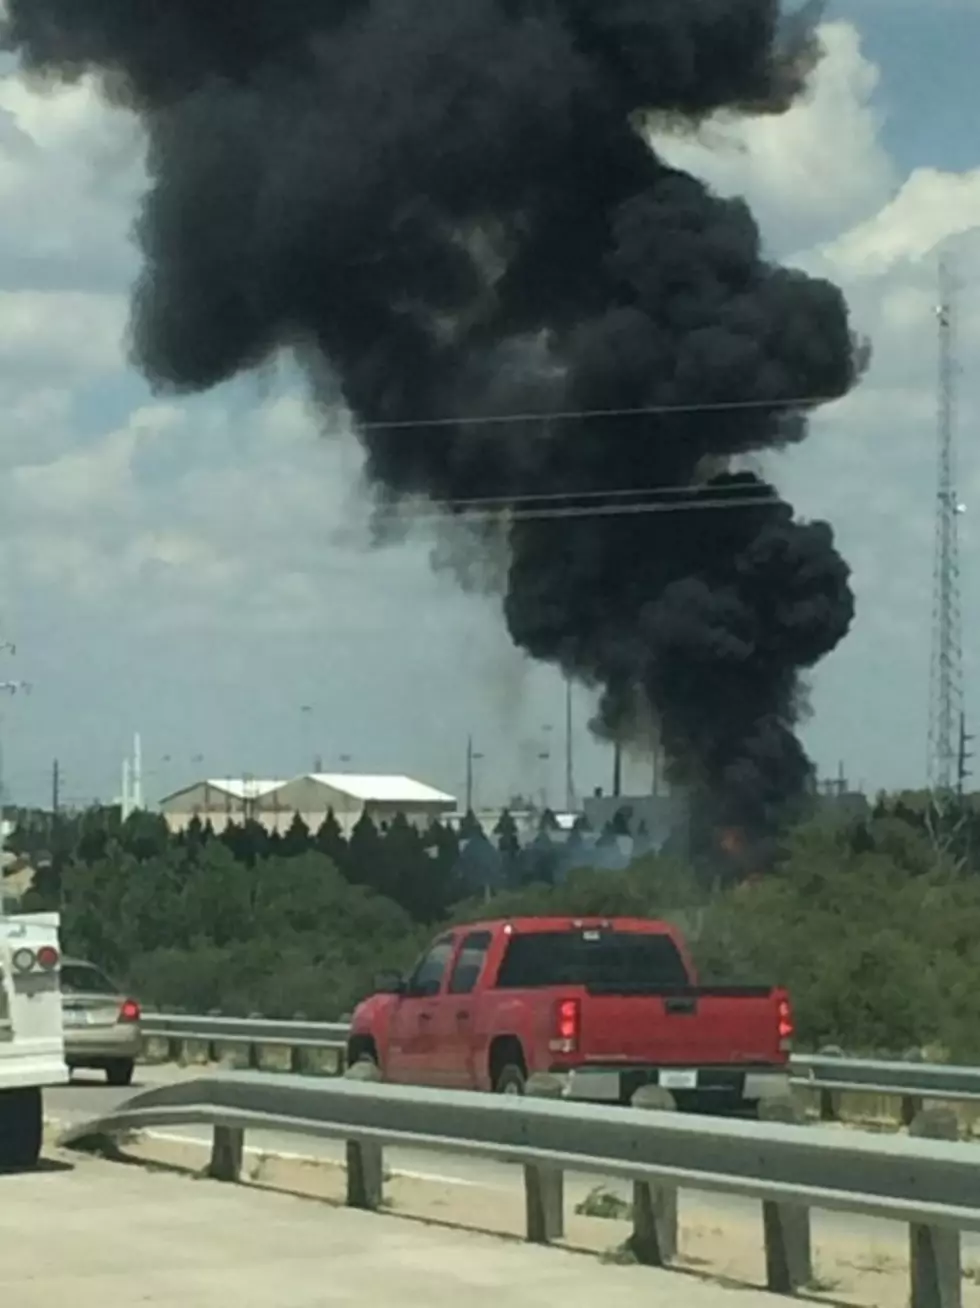 Lubbock Fire Department Battling Large Fire Near South Plains Electric Coop Offices